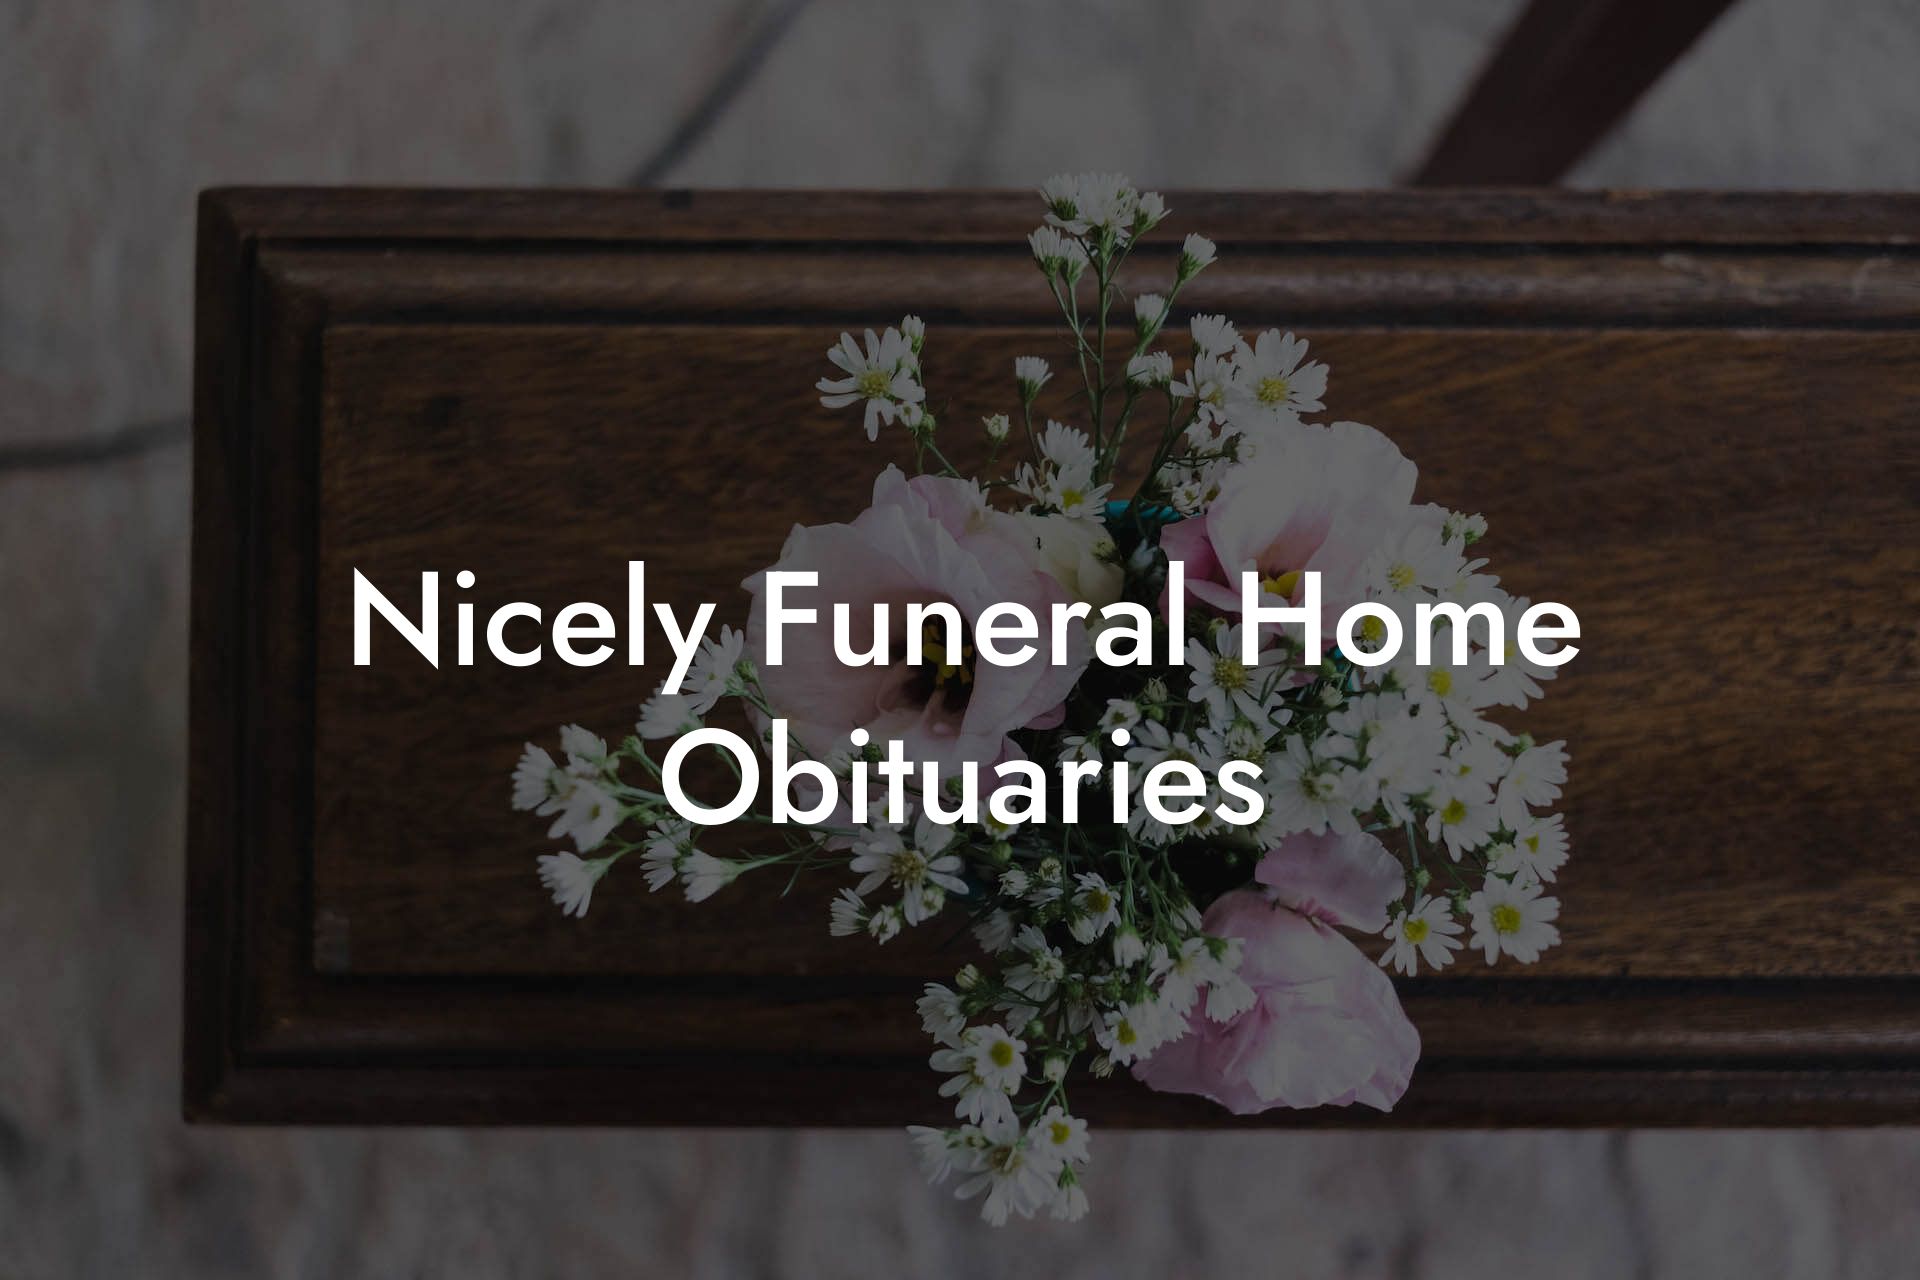 Nicely Funeral Home Obituaries